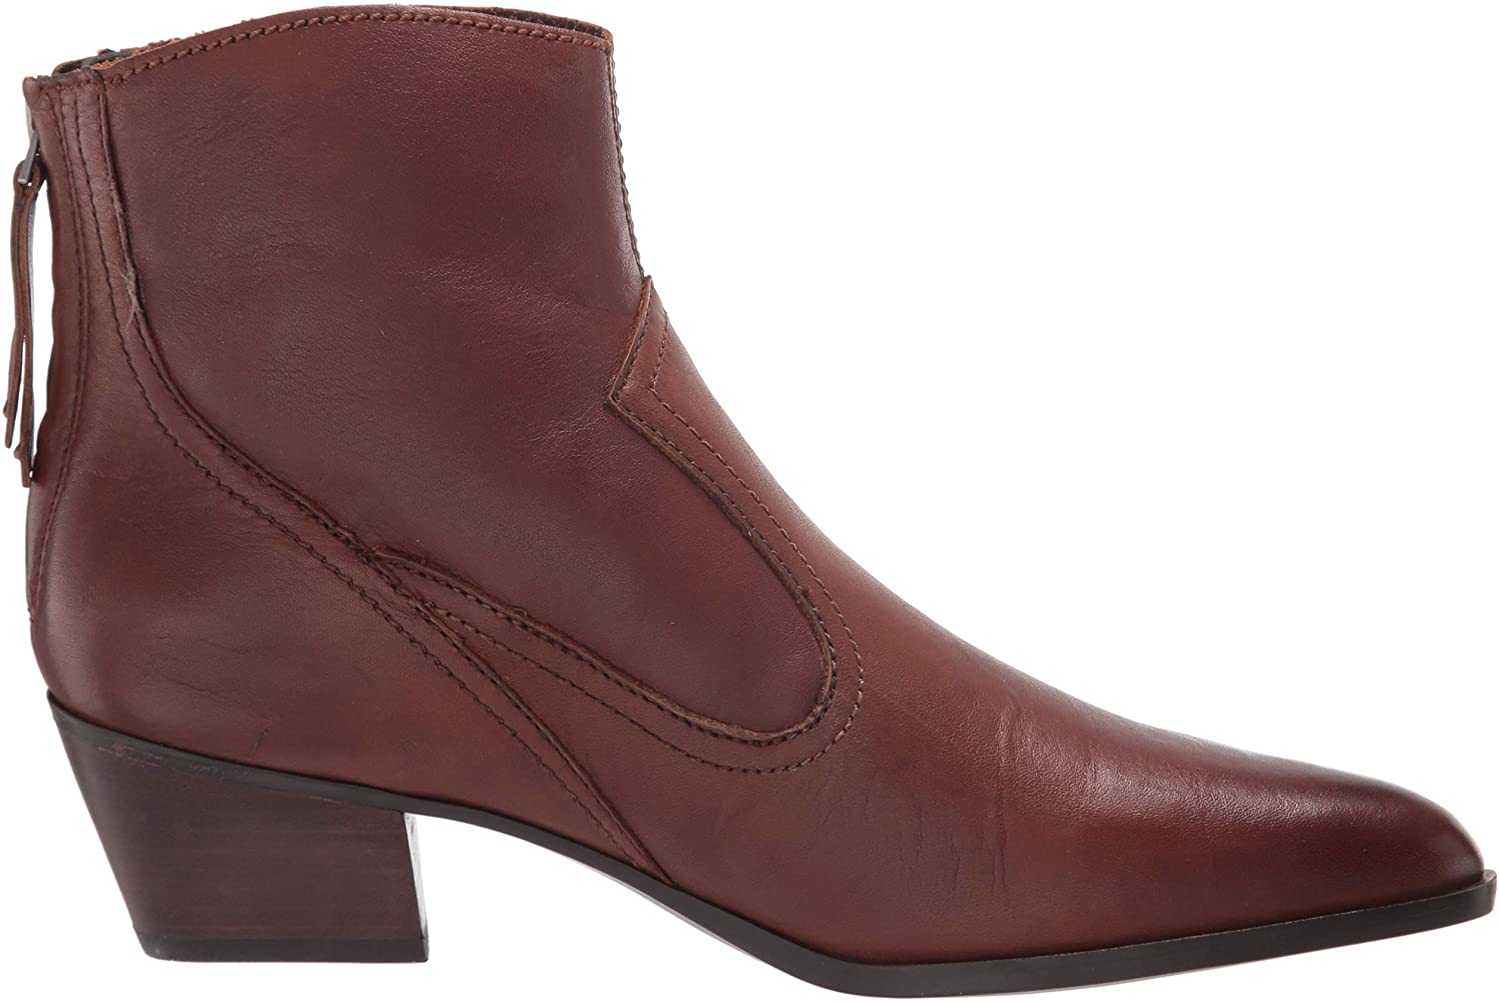 Naturalizer Women's Wallis Booties Ankle Boot, Cinnamon Leather, Size 9 ...